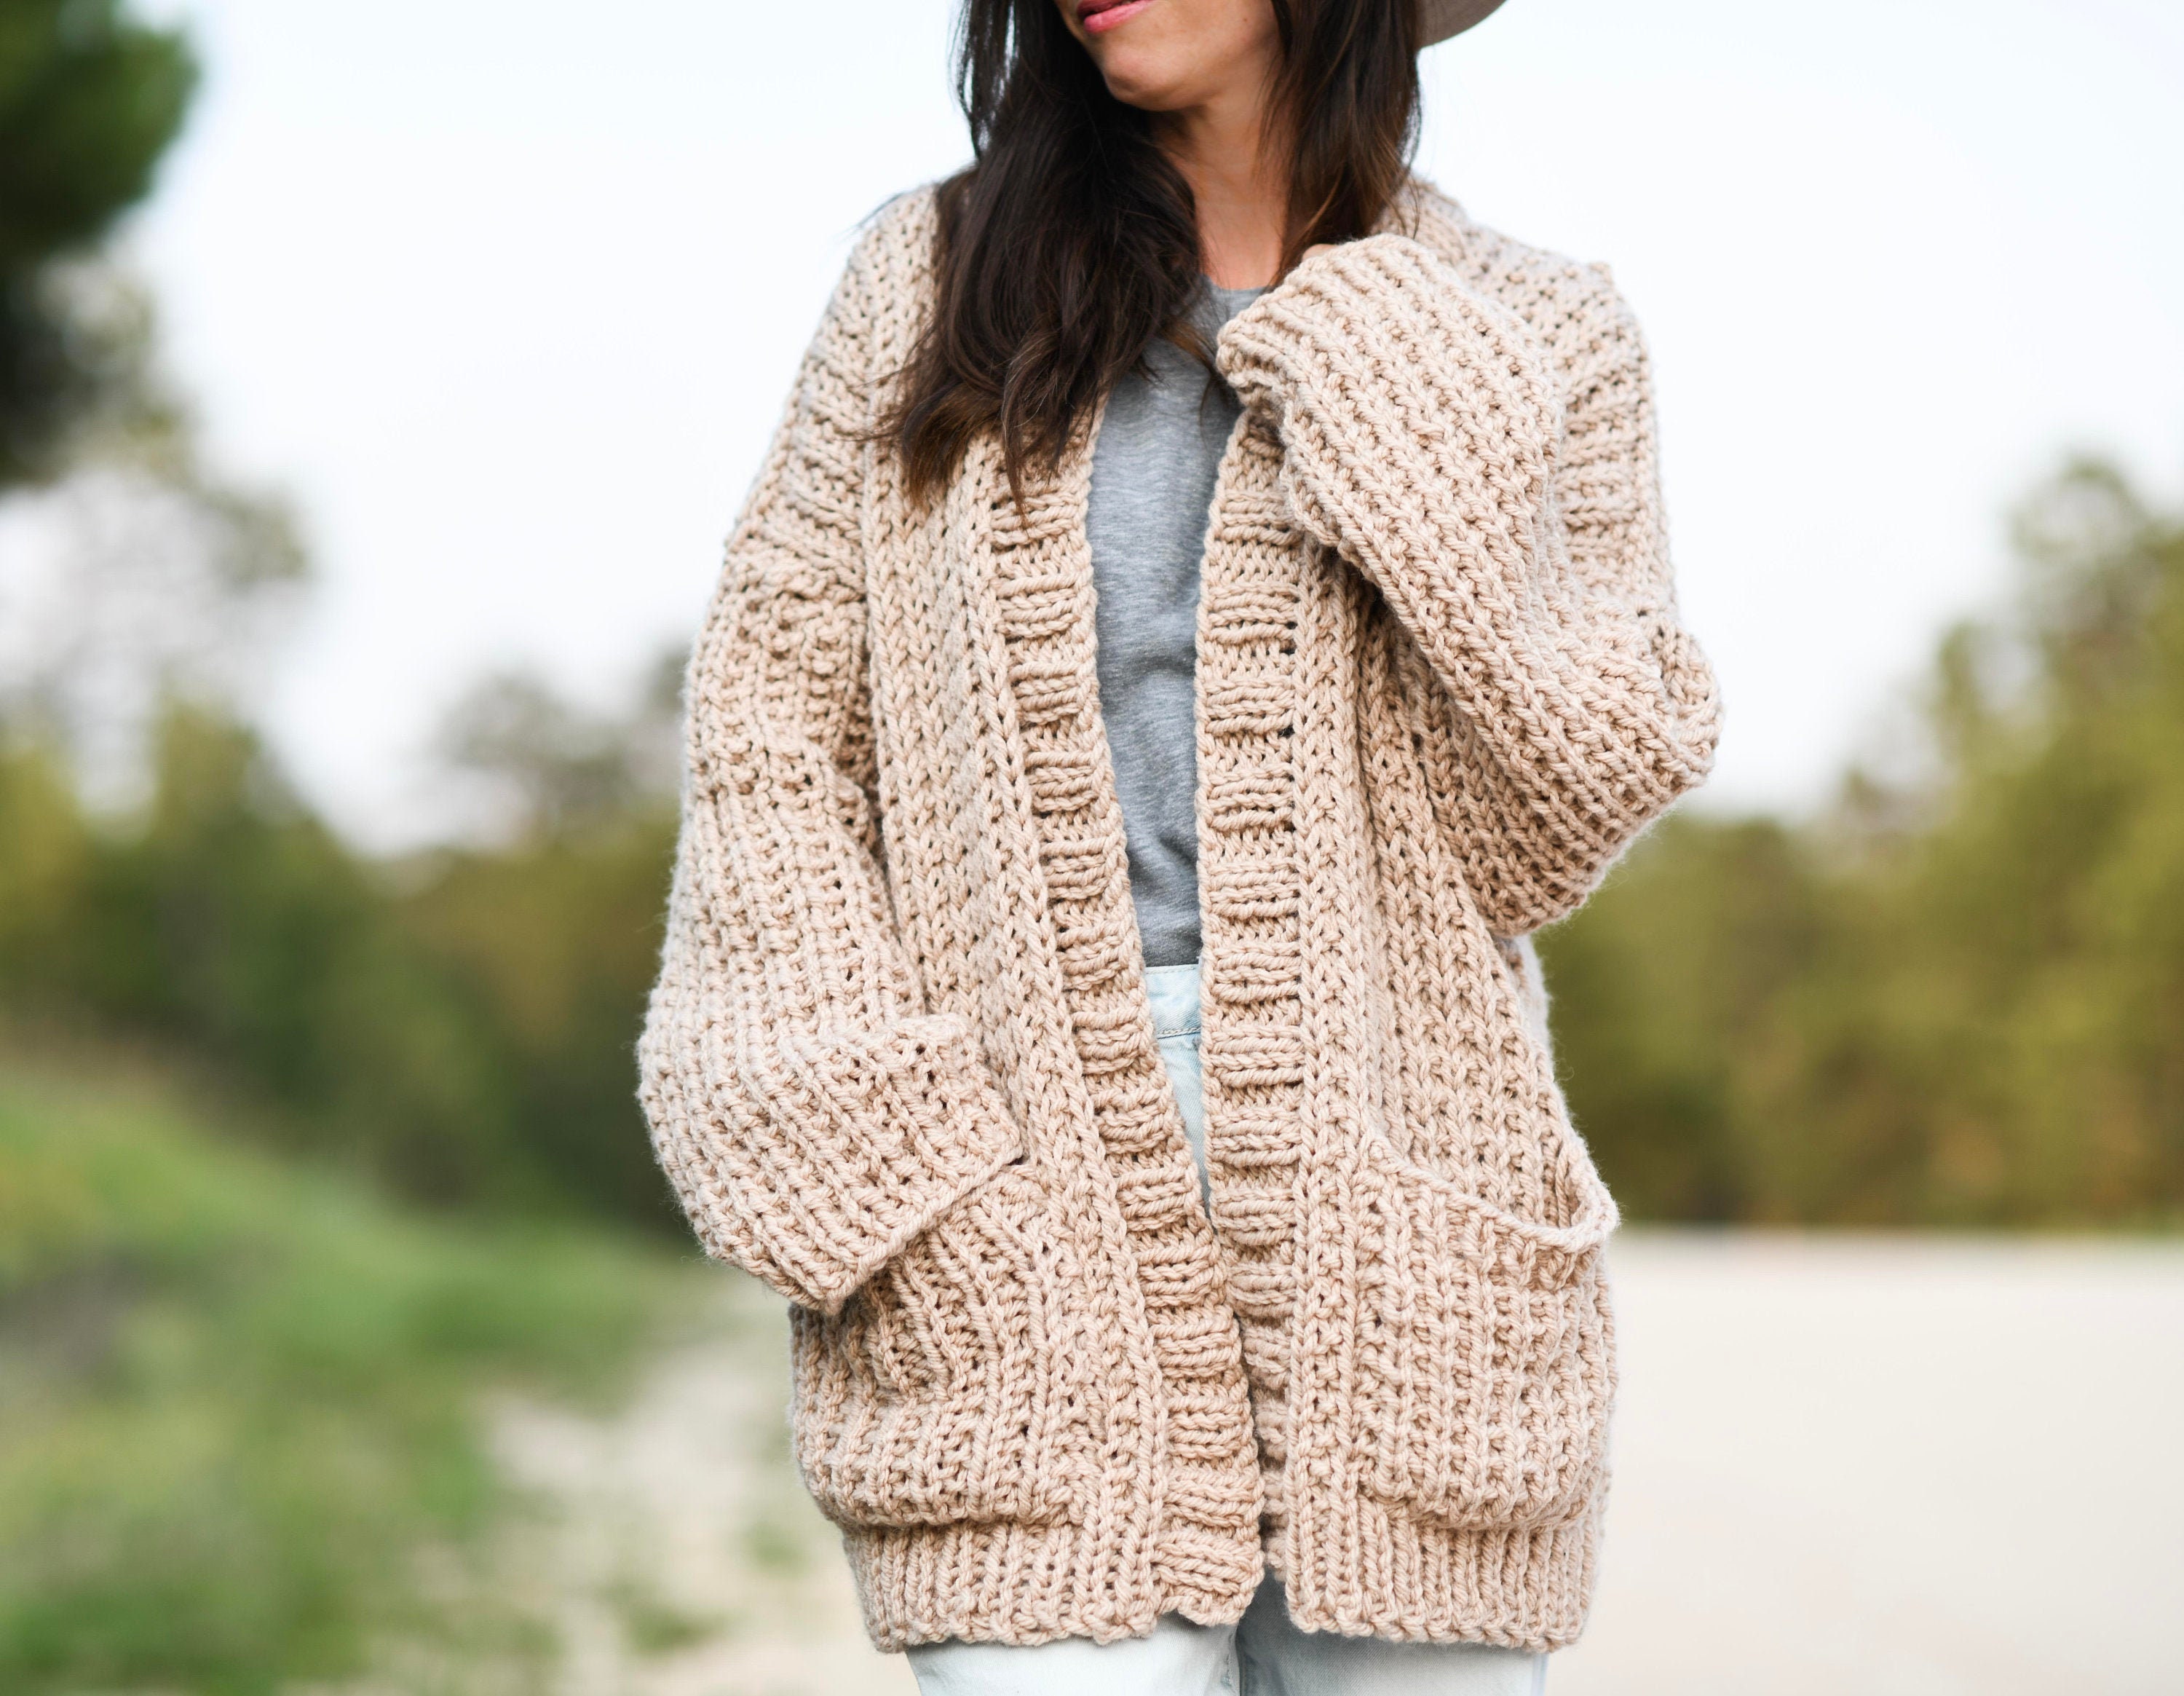 My Big Comfy Ribbed Cardi Knitting Pattern, Easy Knit Sweater